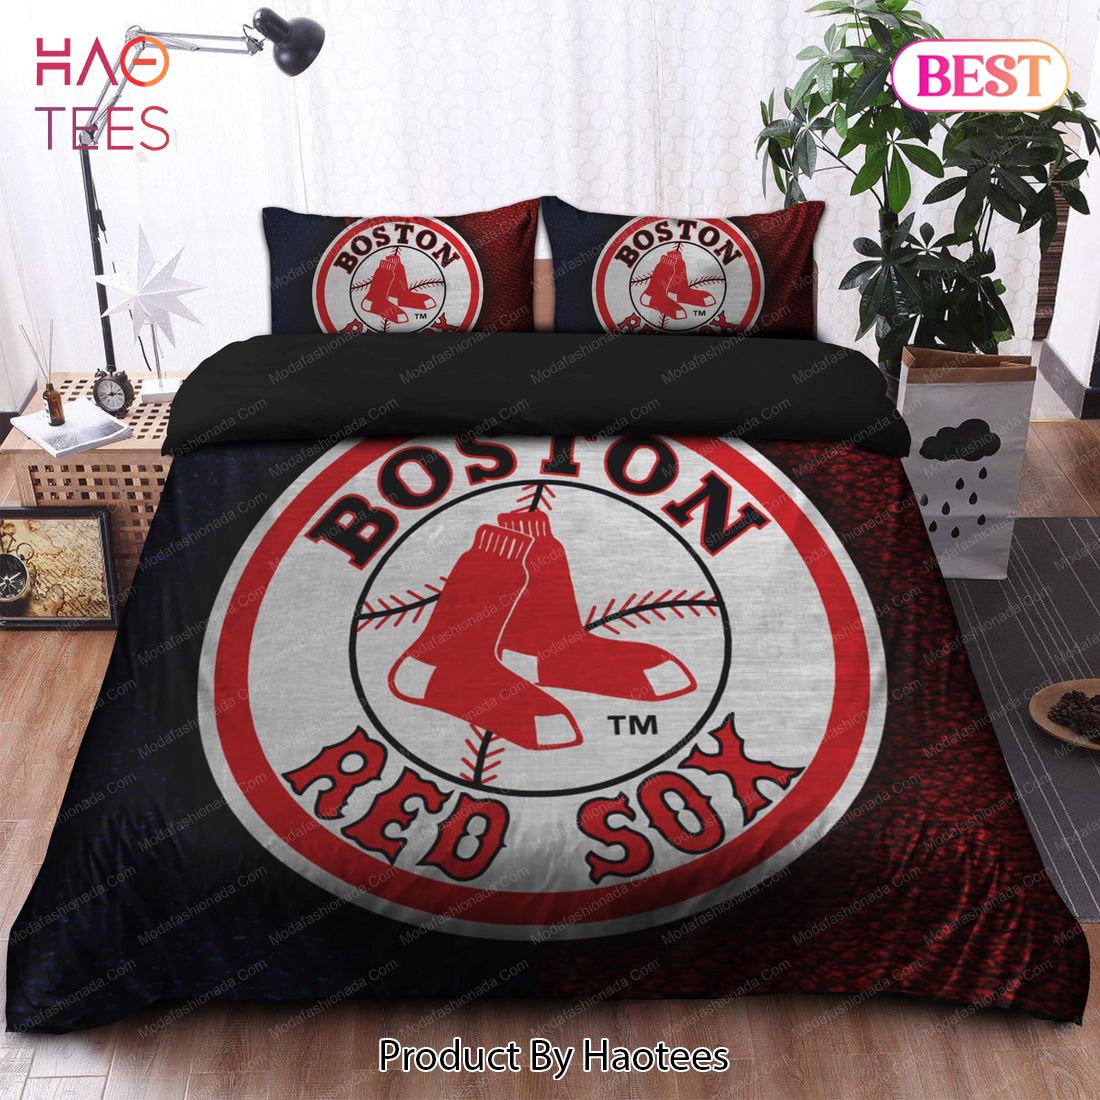 Boston Red Sox Yeezy Shoes – ANEWDAY Store